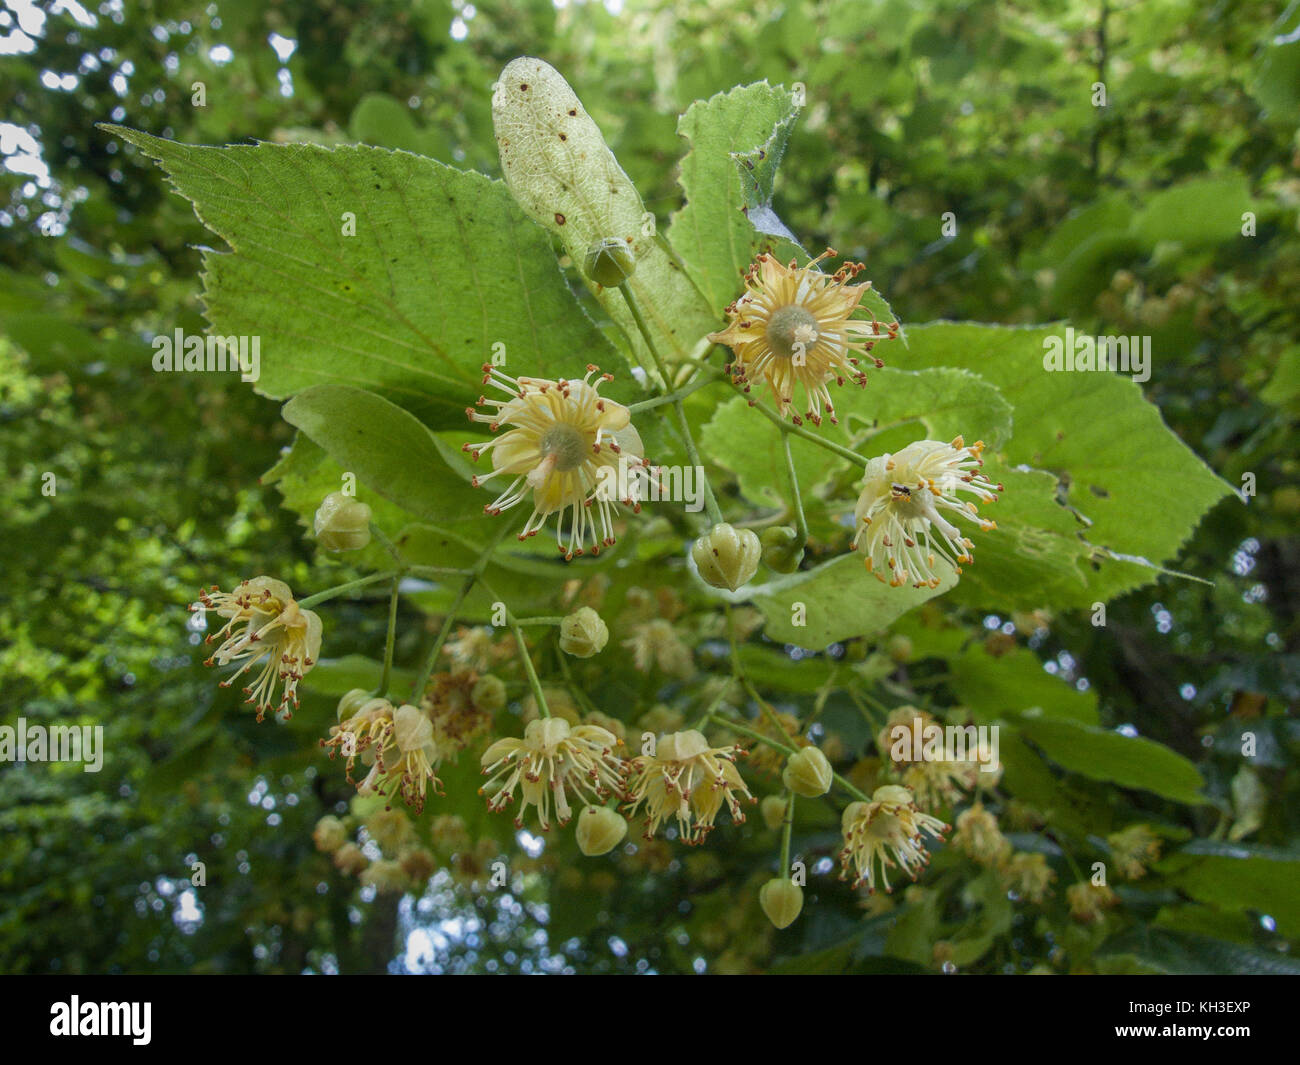 Flowers of a Common Lime / Tilia tree - Tilia europaea species. The sweet smelling flowers were / are used to make Linden tea (a herbal tea). Stock Photo